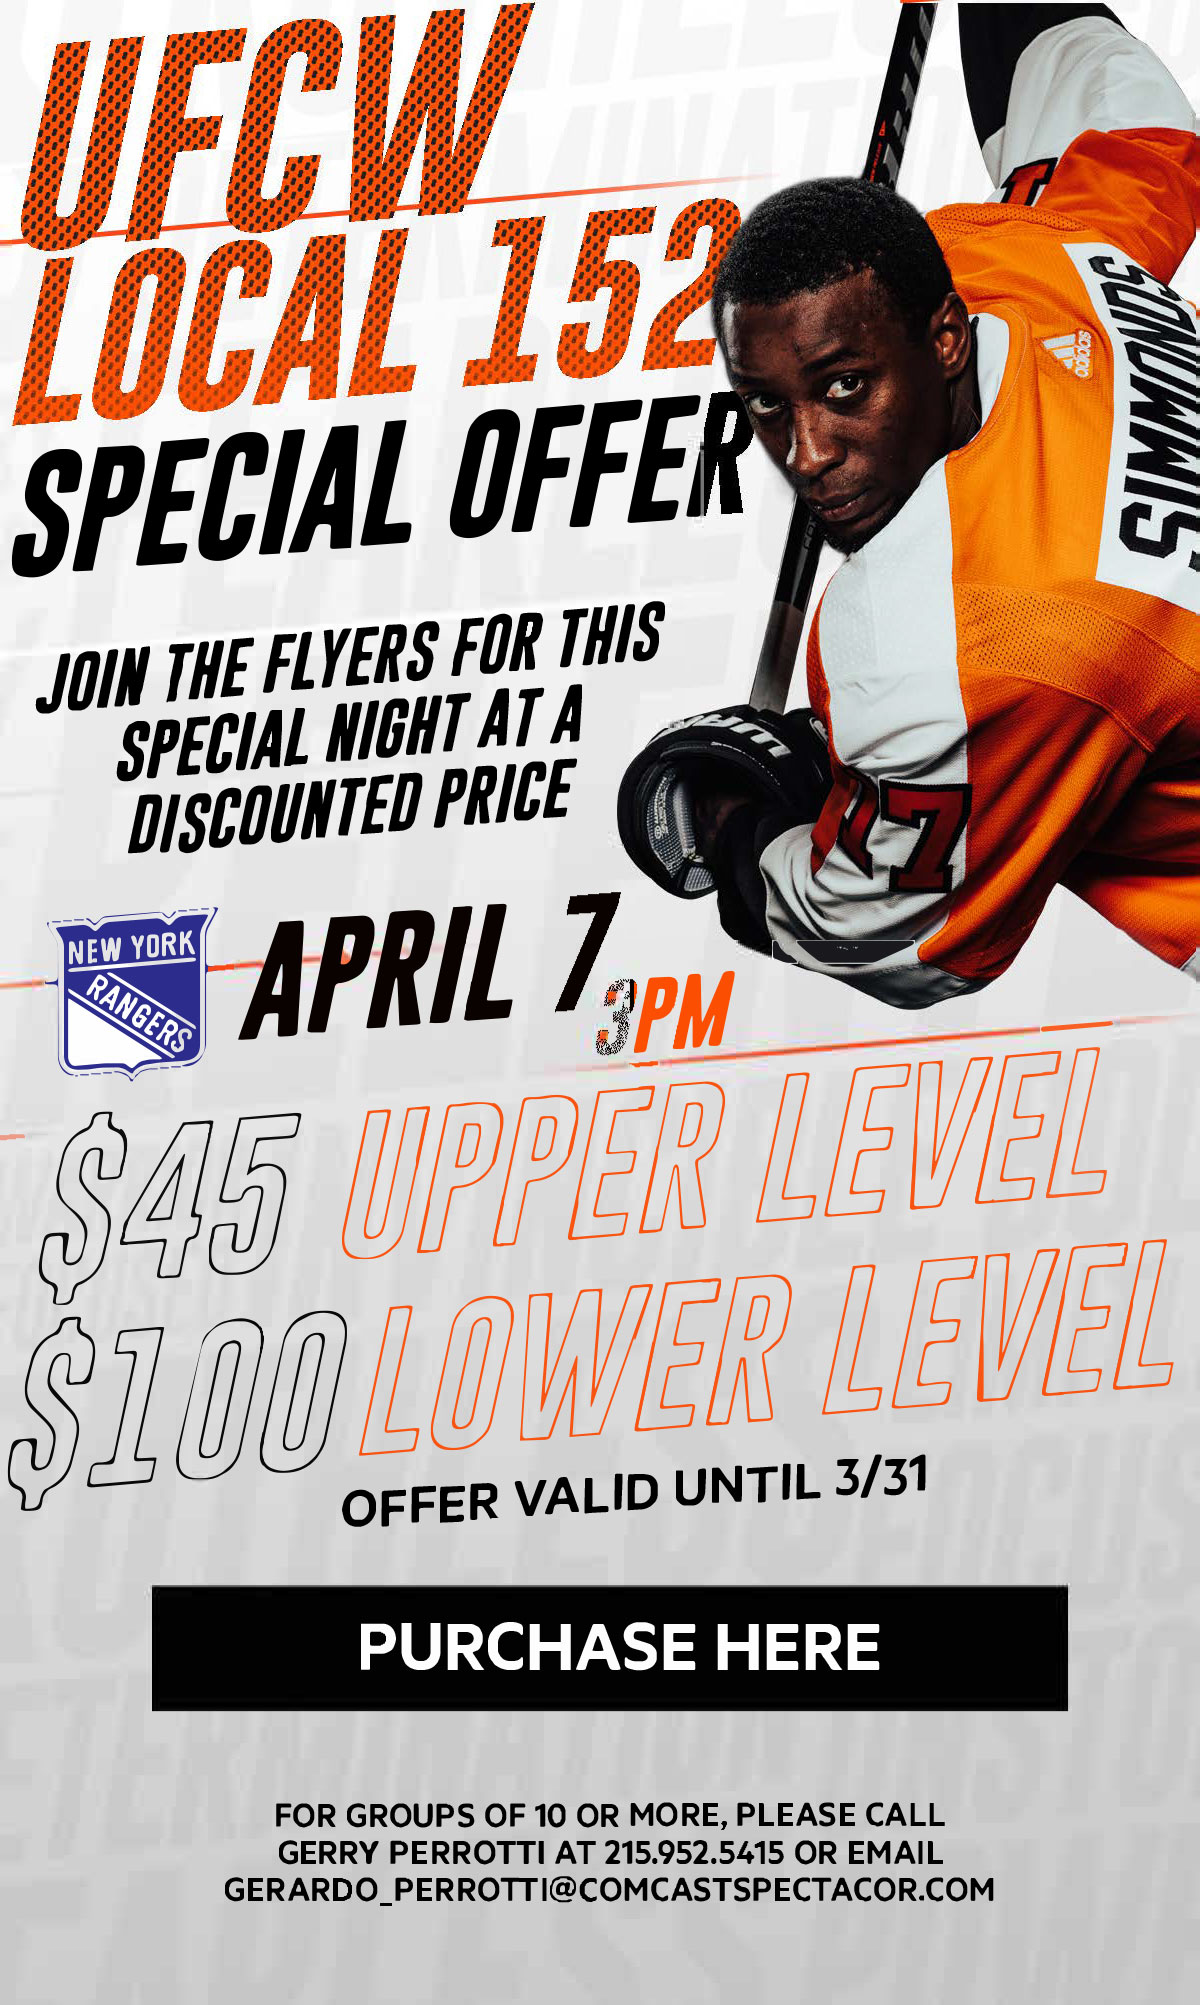 Discounted Flyers Tickets offer